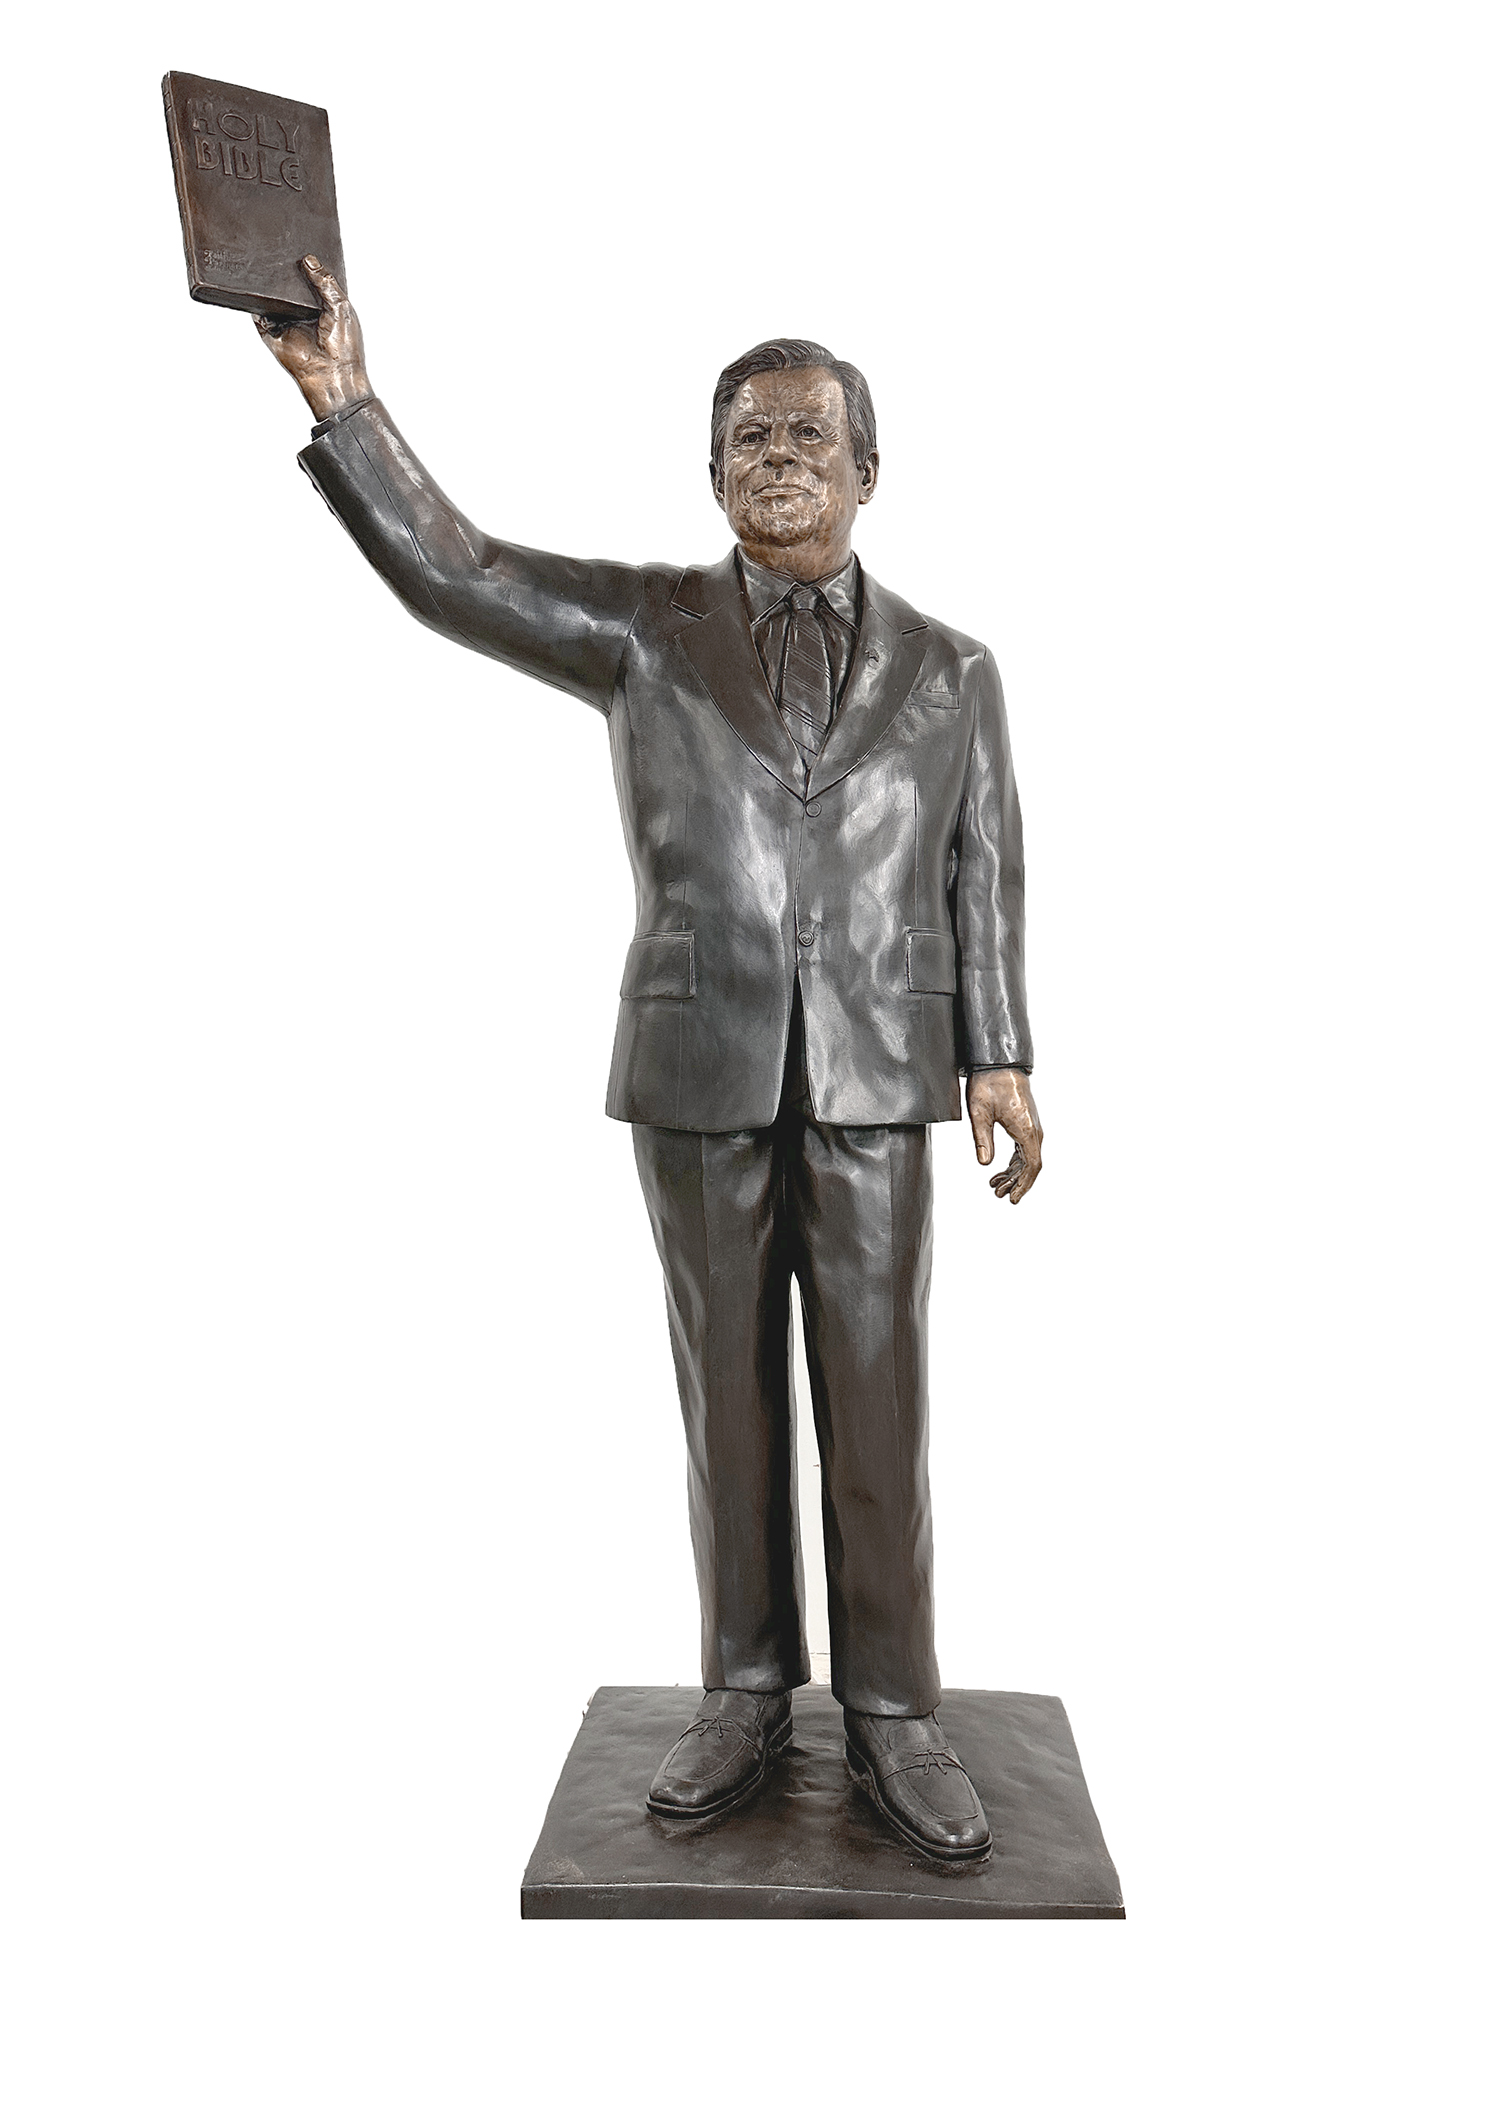 Completed Custom Jerry Falwell Sculpture exclusively designed and produced by Metropolitan Galleries Inc